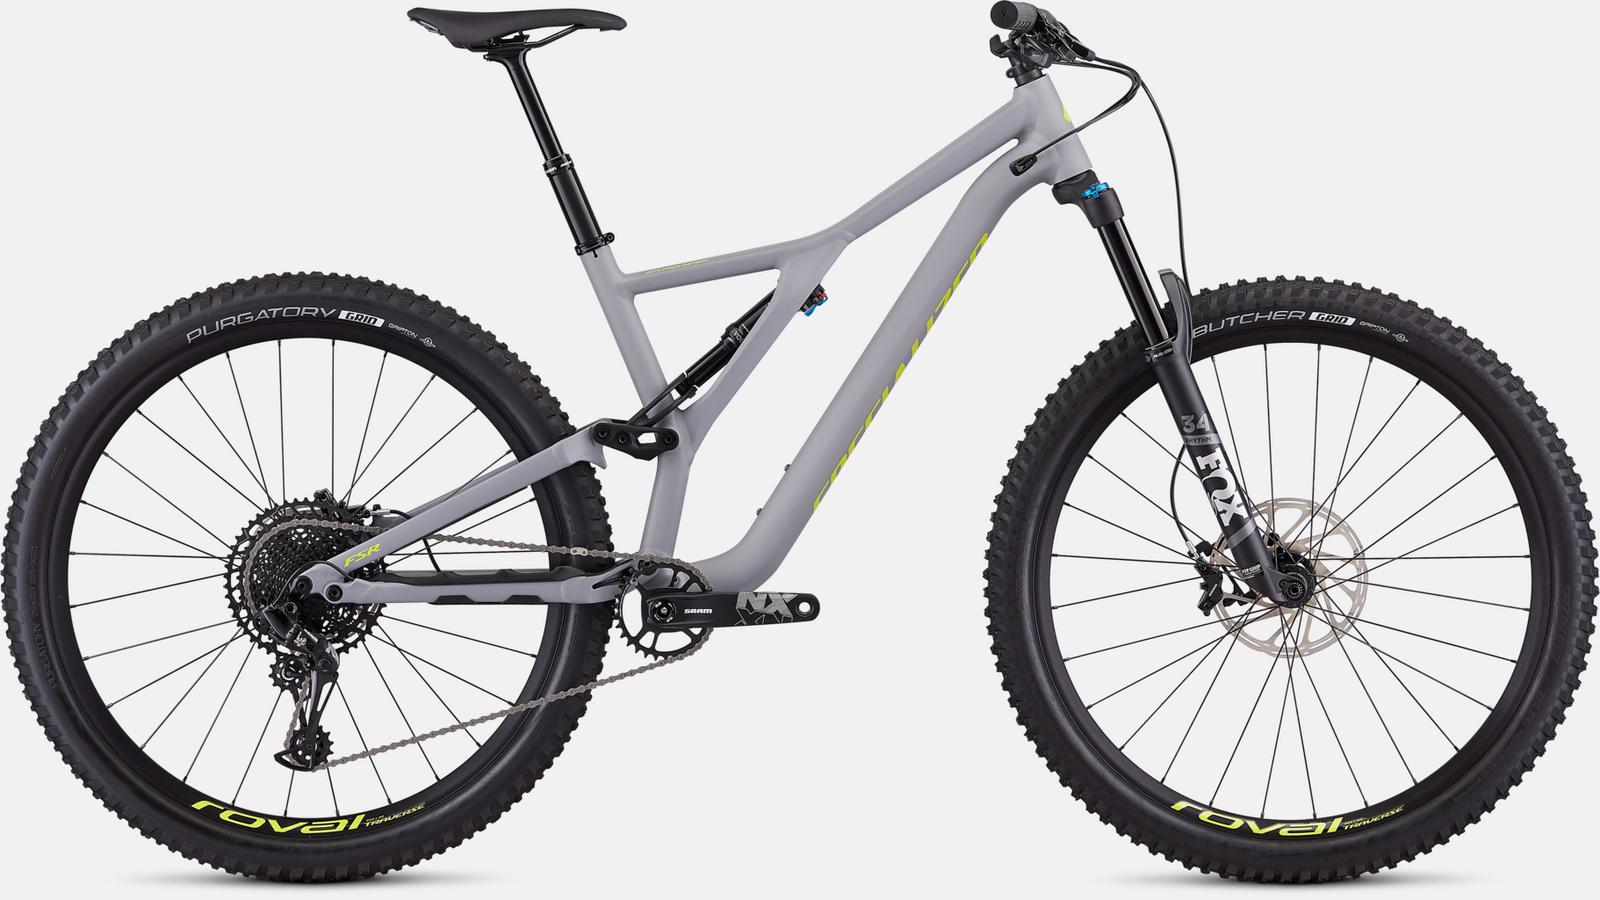 Paint for 2020 Specialized Stumpjumper Comp Alloy 29 - Satin Cool Grey